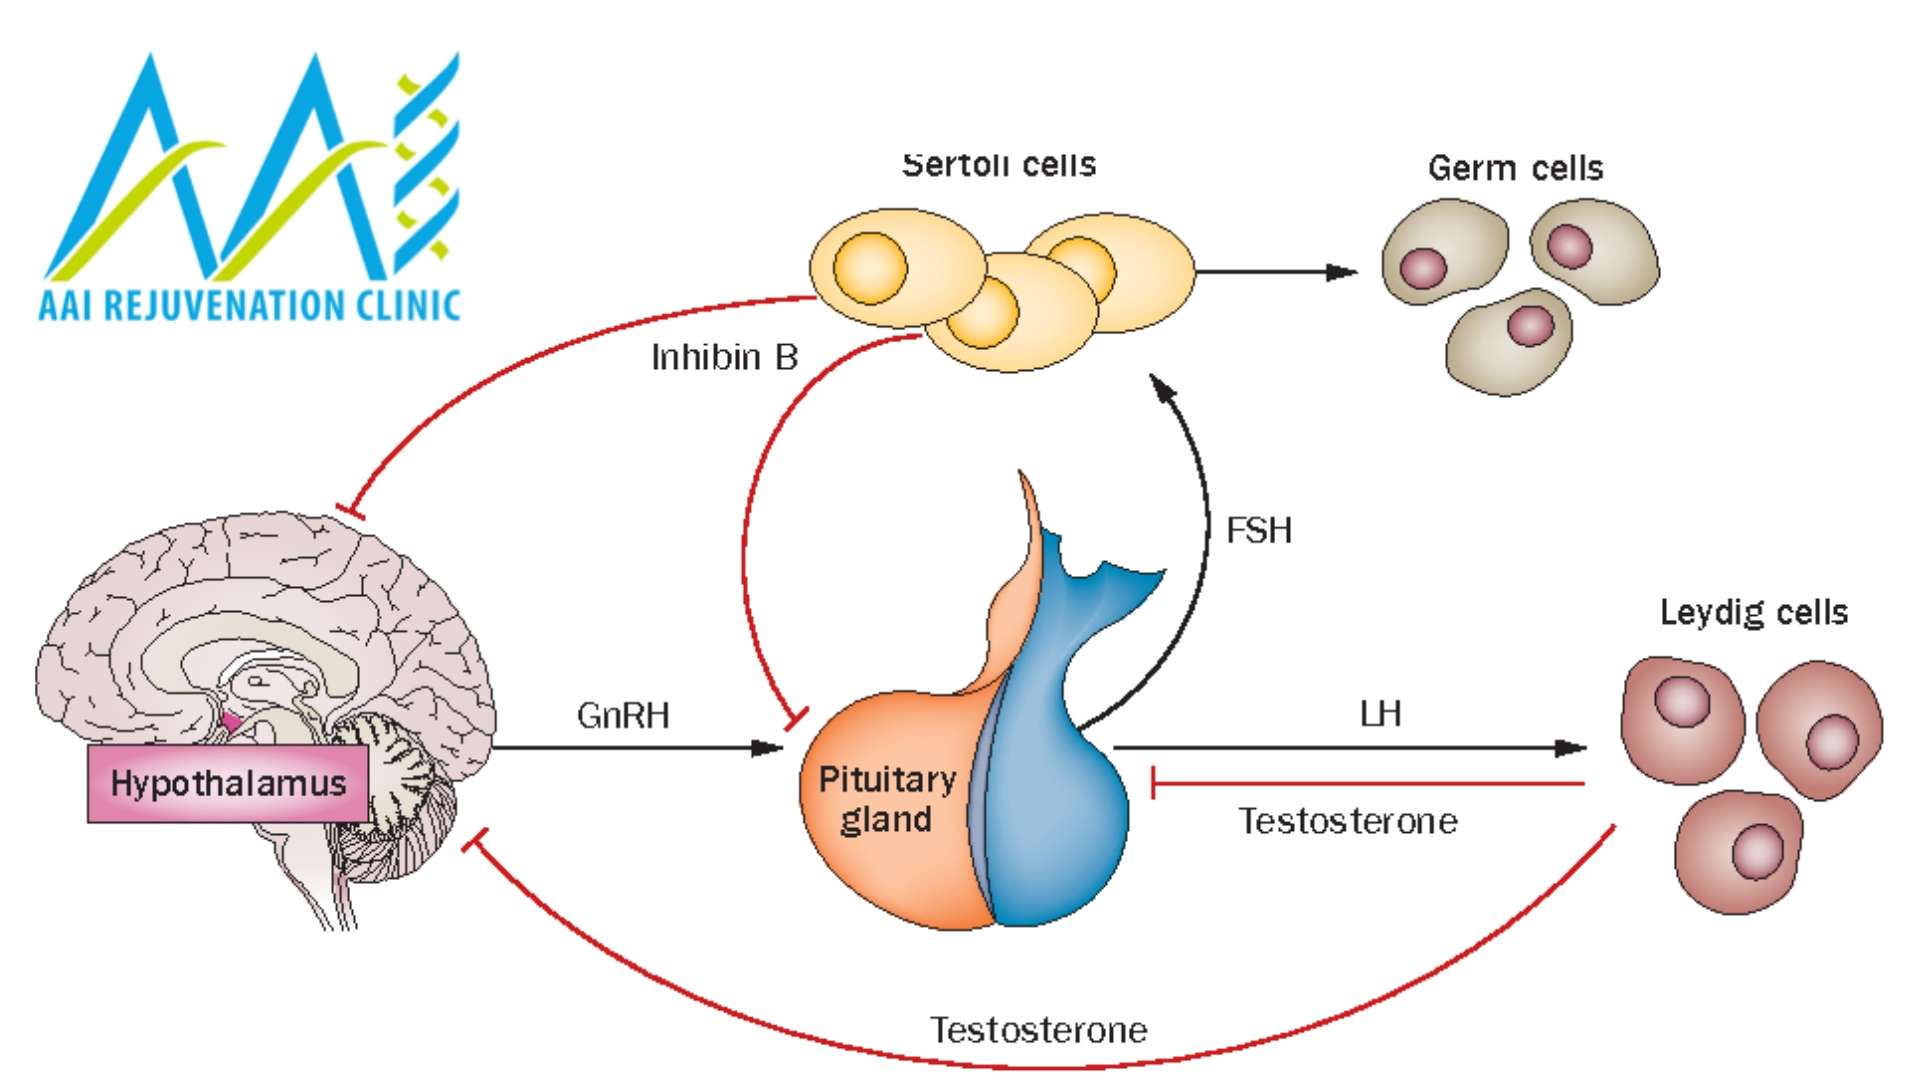 What is Follicle Stimulating Hormone (FSH)?